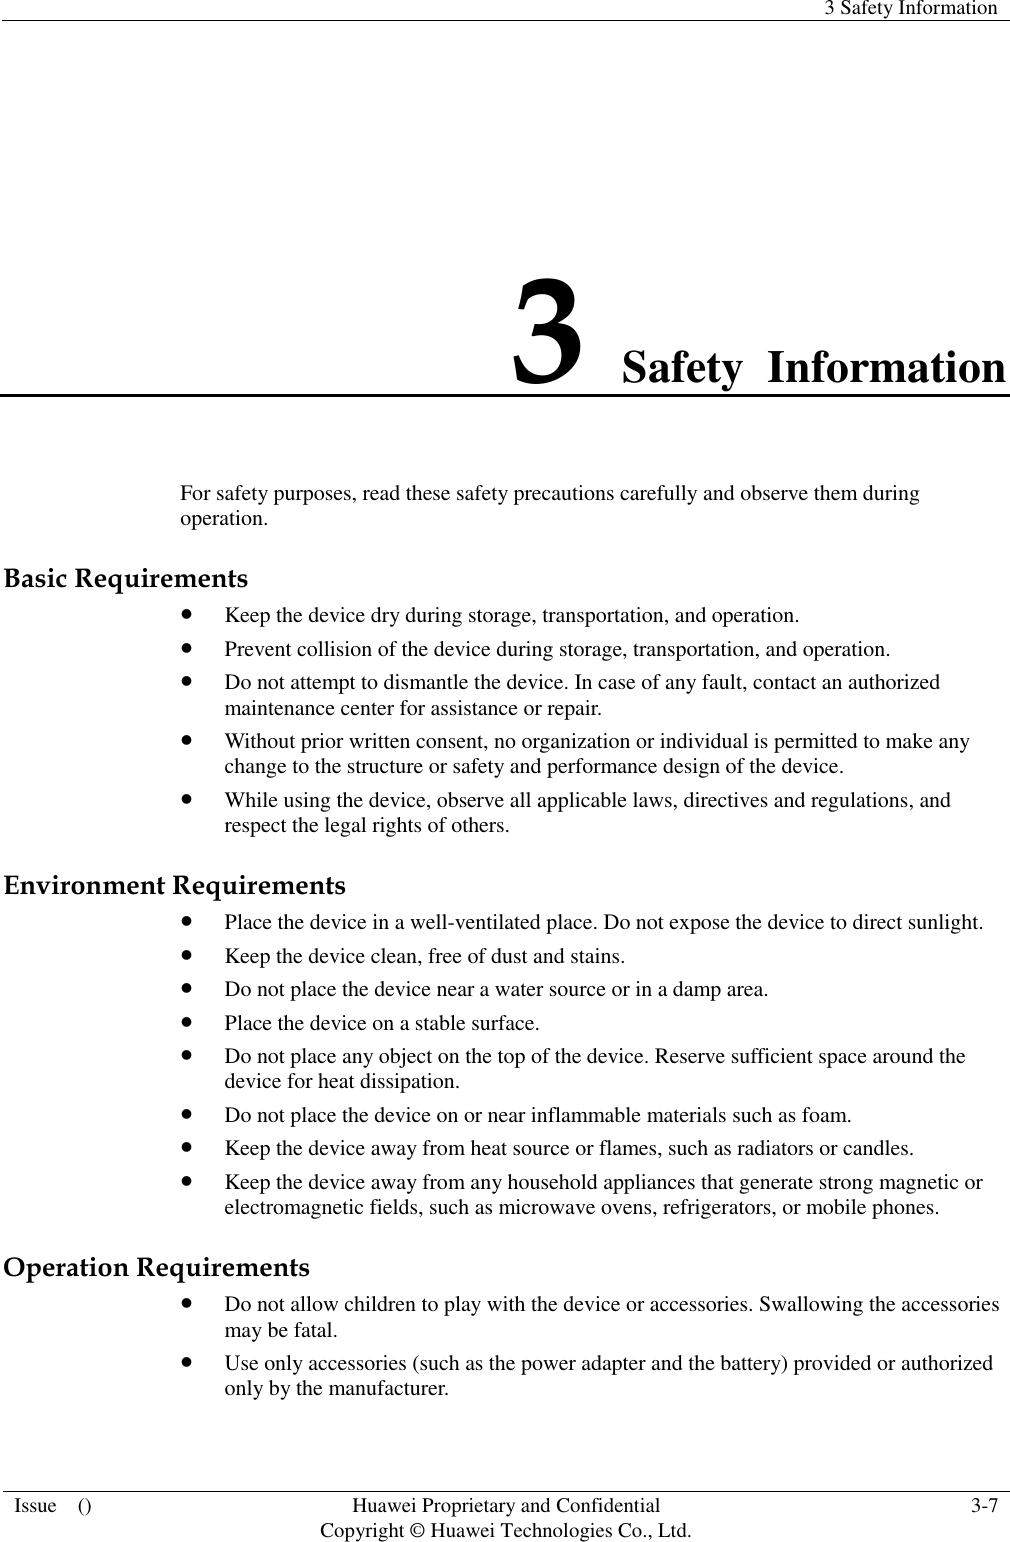   3 Safety Information  Issue    () Huawei Proprietary and Confidential                                     Copyright © Huawei Technologies Co., Ltd. 3-7   3 Safety  Information For safety purposes, read these safety precautions carefully and observe them during operation. Basic Requirements  Keep the device dry during storage, transportation, and operation.  Prevent collision of the device during storage, transportation, and operation.  Do not attempt to dismantle the device. In case of any fault, contact an authorized maintenance center for assistance or repair.  Without prior written consent, no organization or individual is permitted to make any change to the structure or safety and performance design of the device.  While using the device, observe all applicable laws, directives and regulations, and respect the legal rights of others. Environment Requirements  Place the device in a well-ventilated place. Do not expose the device to direct sunlight.  Keep the device clean, free of dust and stains.  Do not place the device near a water source or in a damp area.  Place the device on a stable surface.  Do not place any object on the top of the device. Reserve sufficient space around the device for heat dissipation.  Do not place the device on or near inflammable materials such as foam.  Keep the device away from heat source or flames, such as radiators or candles.  Keep the device away from any household appliances that generate strong magnetic or electromagnetic fields, such as microwave ovens, refrigerators, or mobile phones. Operation Requirements  Do not allow children to play with the device or accessories. Swallowing the accessories may be fatal.  Use only accessories (such as the power adapter and the battery) provided or authorized only by the manufacturer. 